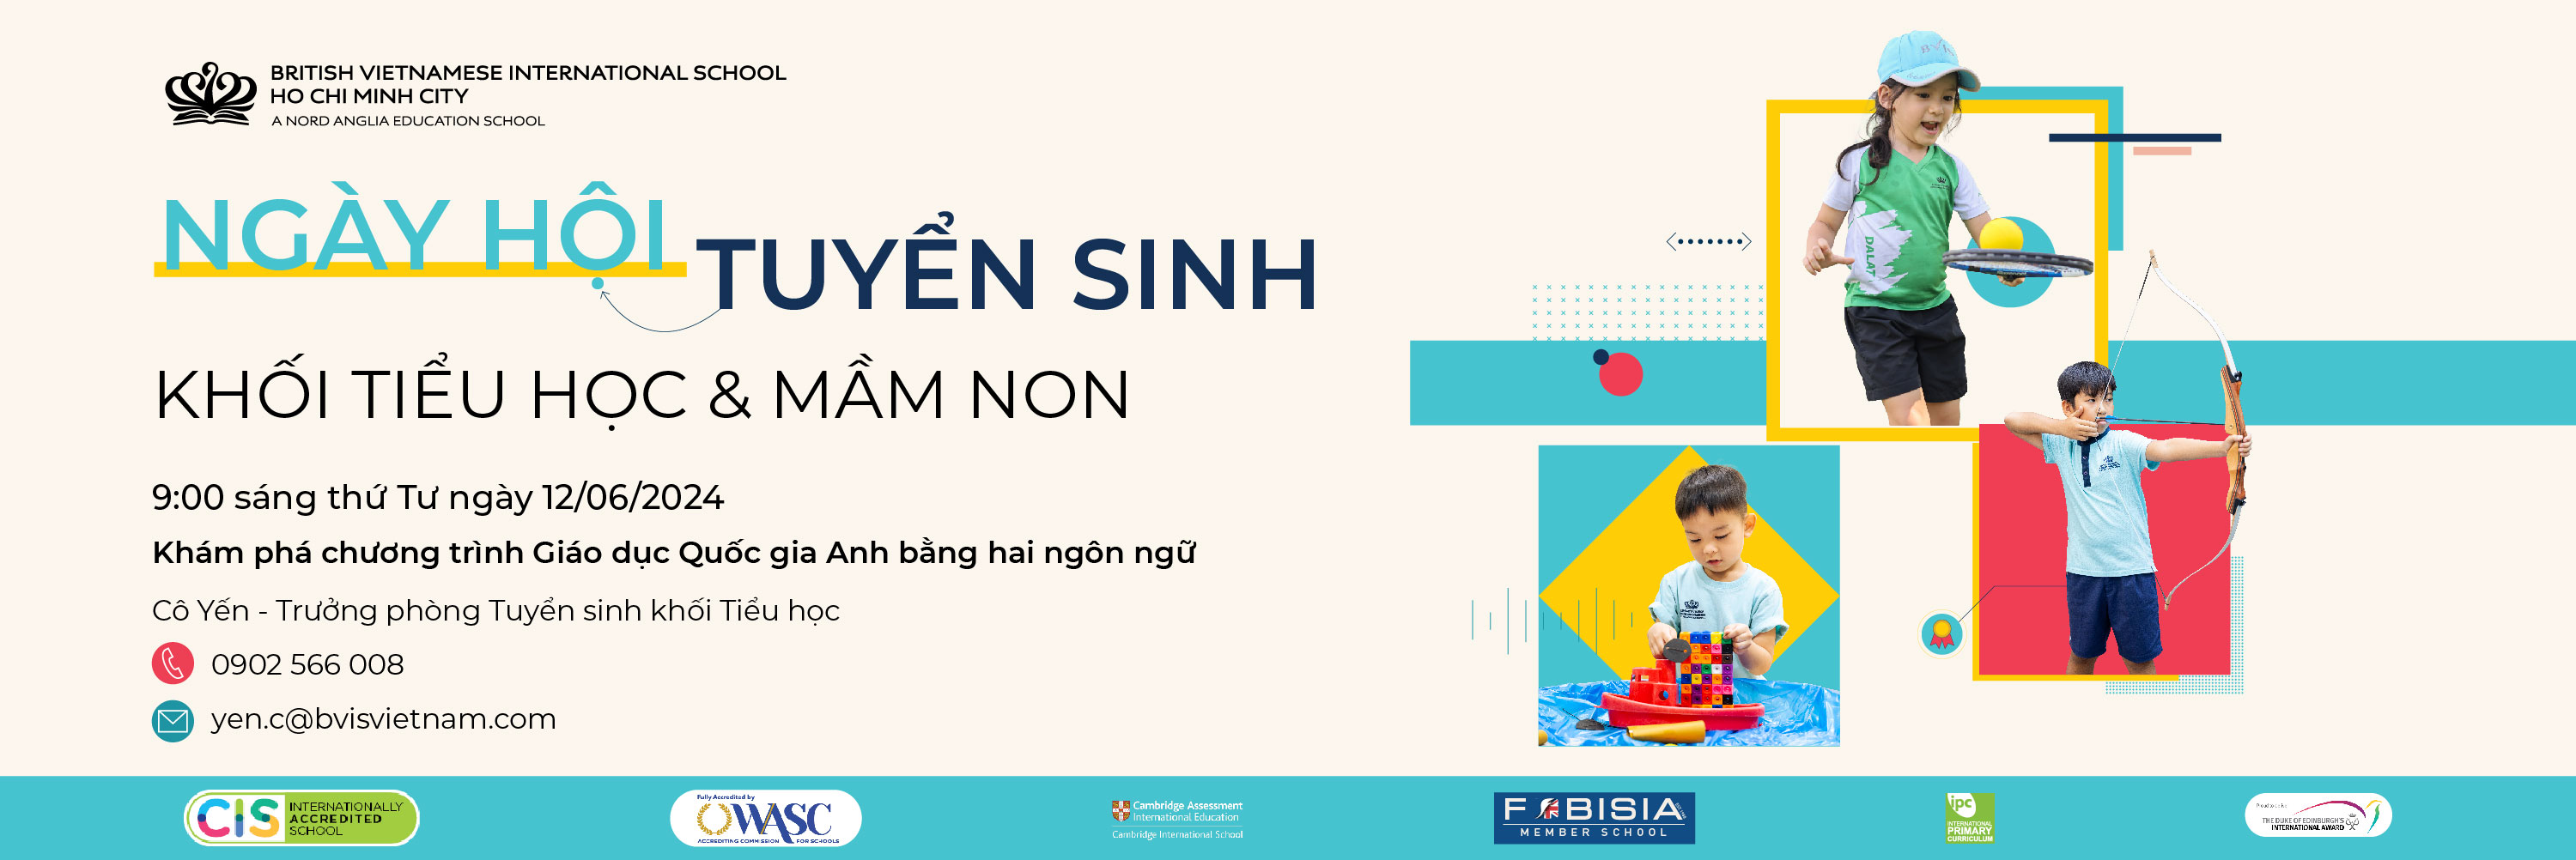 Local campaign | BVIS HCMC | Nord Anglia - Content Page Header - VOD Primary